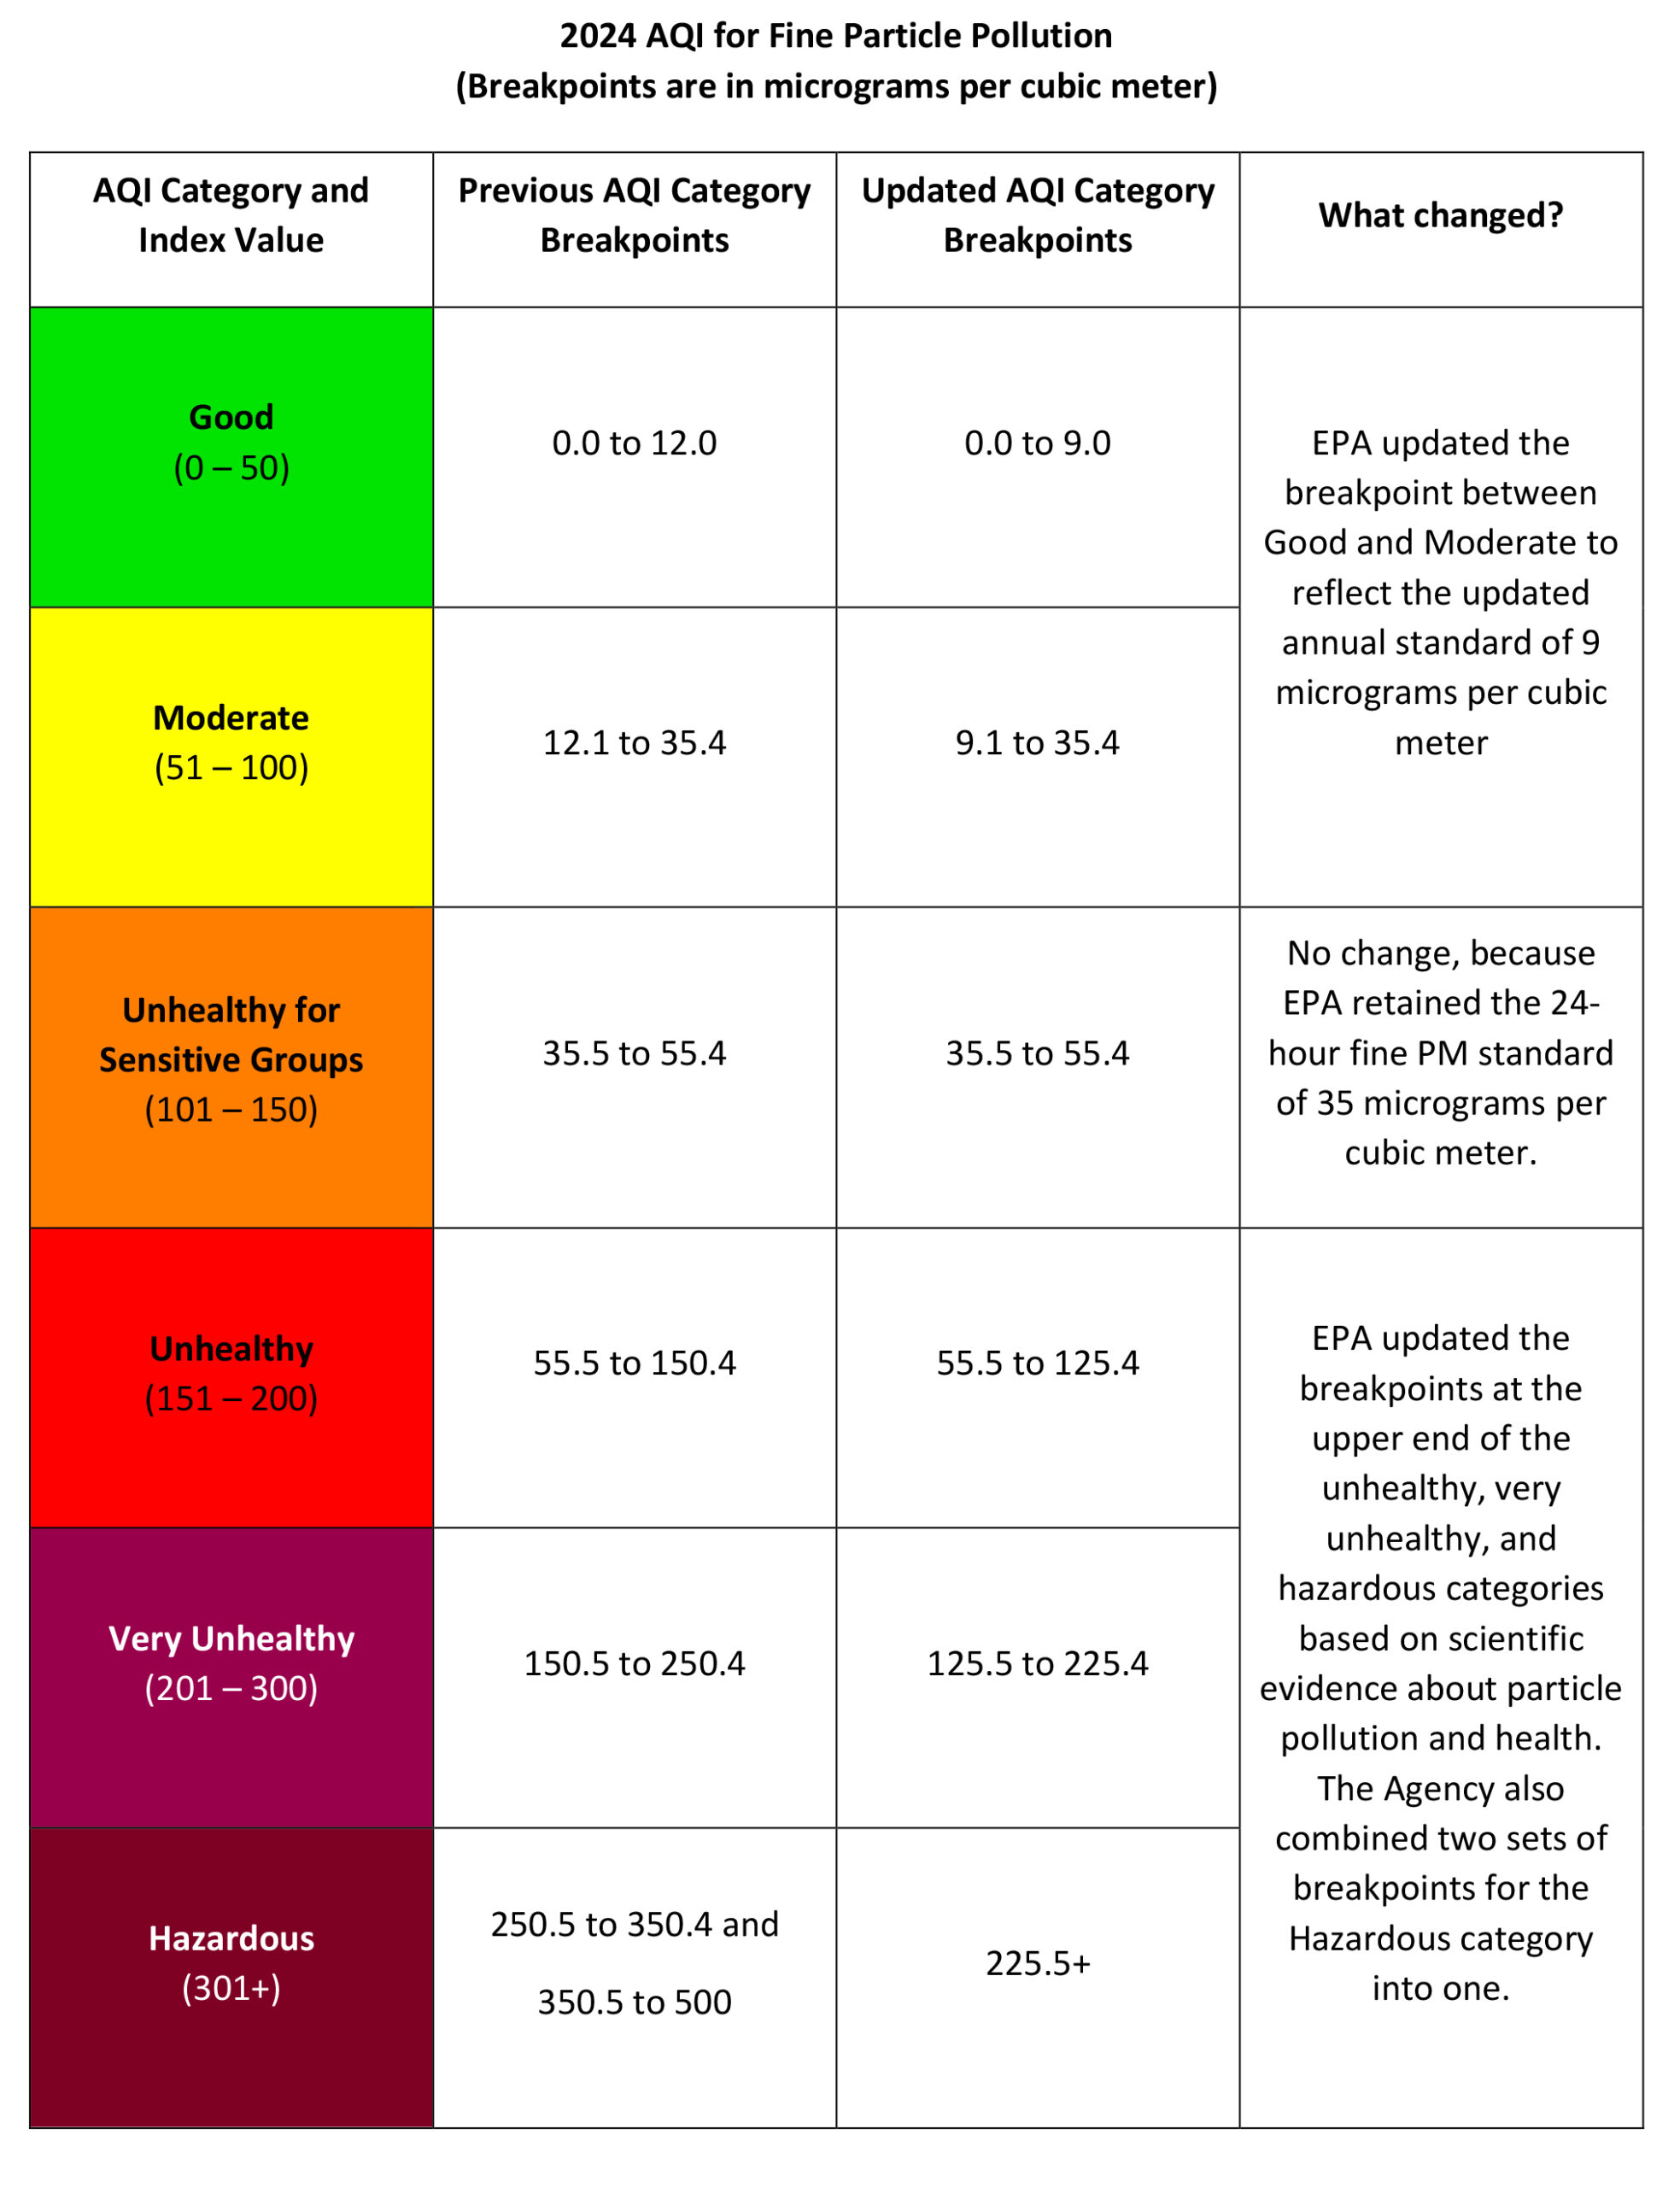 Graphic showing old and new version of Air Quality Index break-points for PM2.5